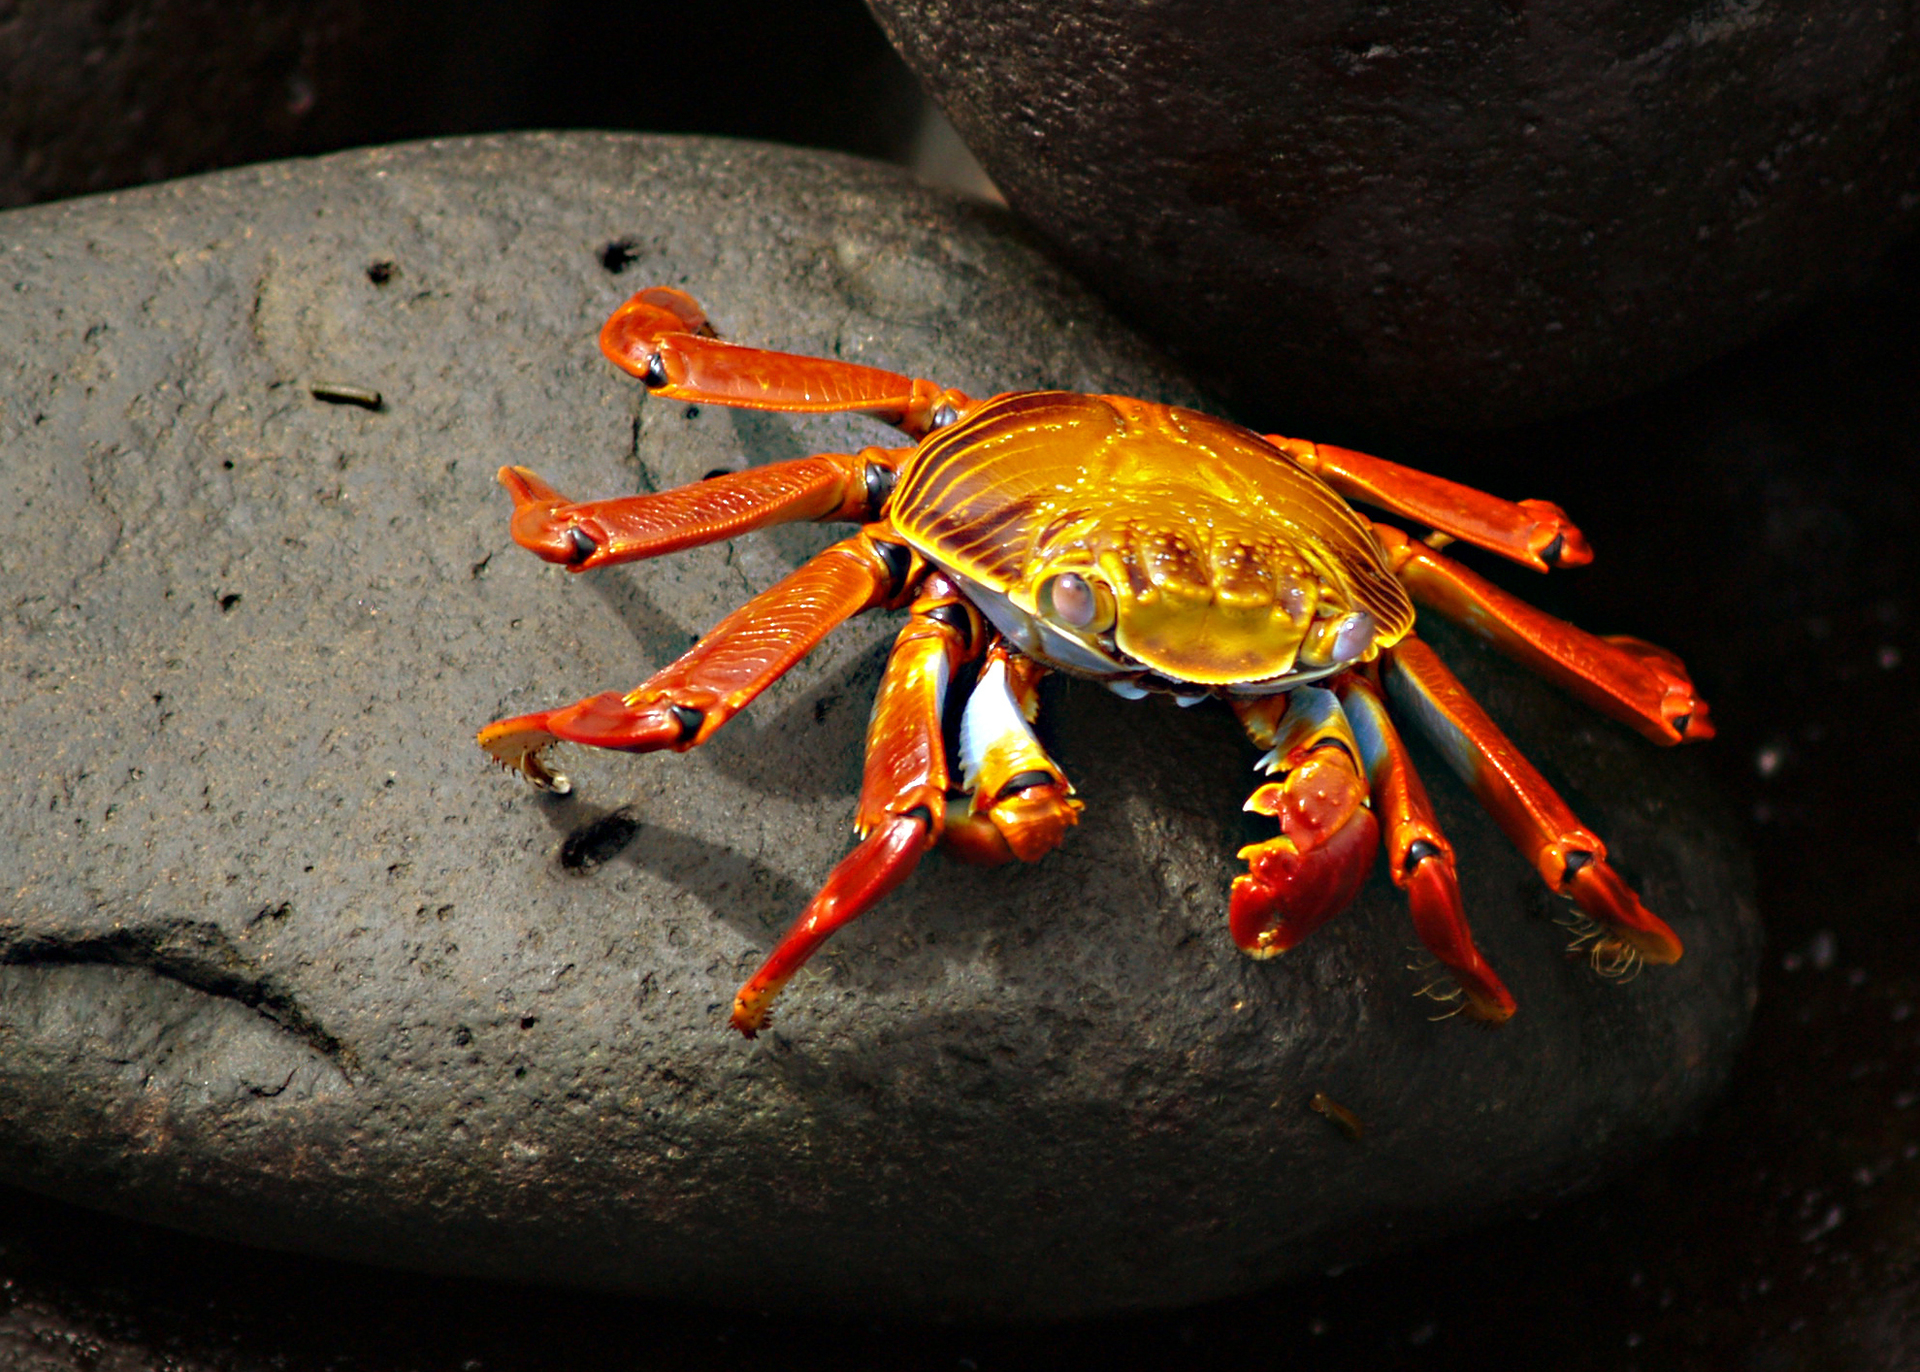 4k Crabs Wallpapers High Quality Download Free HD Wallpapers Download Free Images Wallpaper [wallpaper981.blogspot.com]